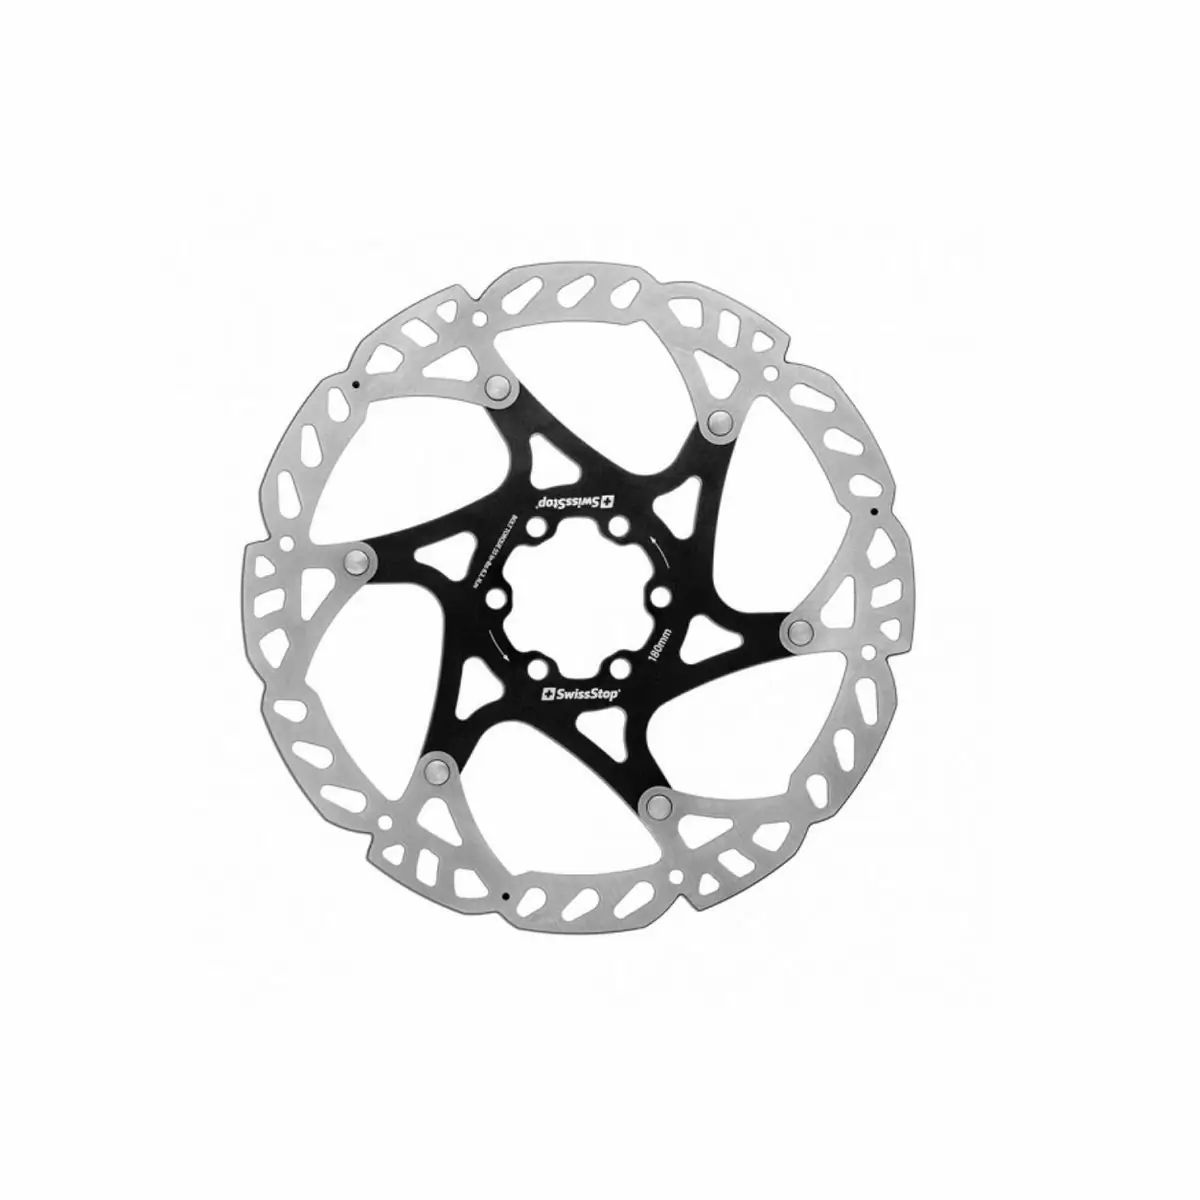 Disc rotor Catalyst 160mm 6-hole - image